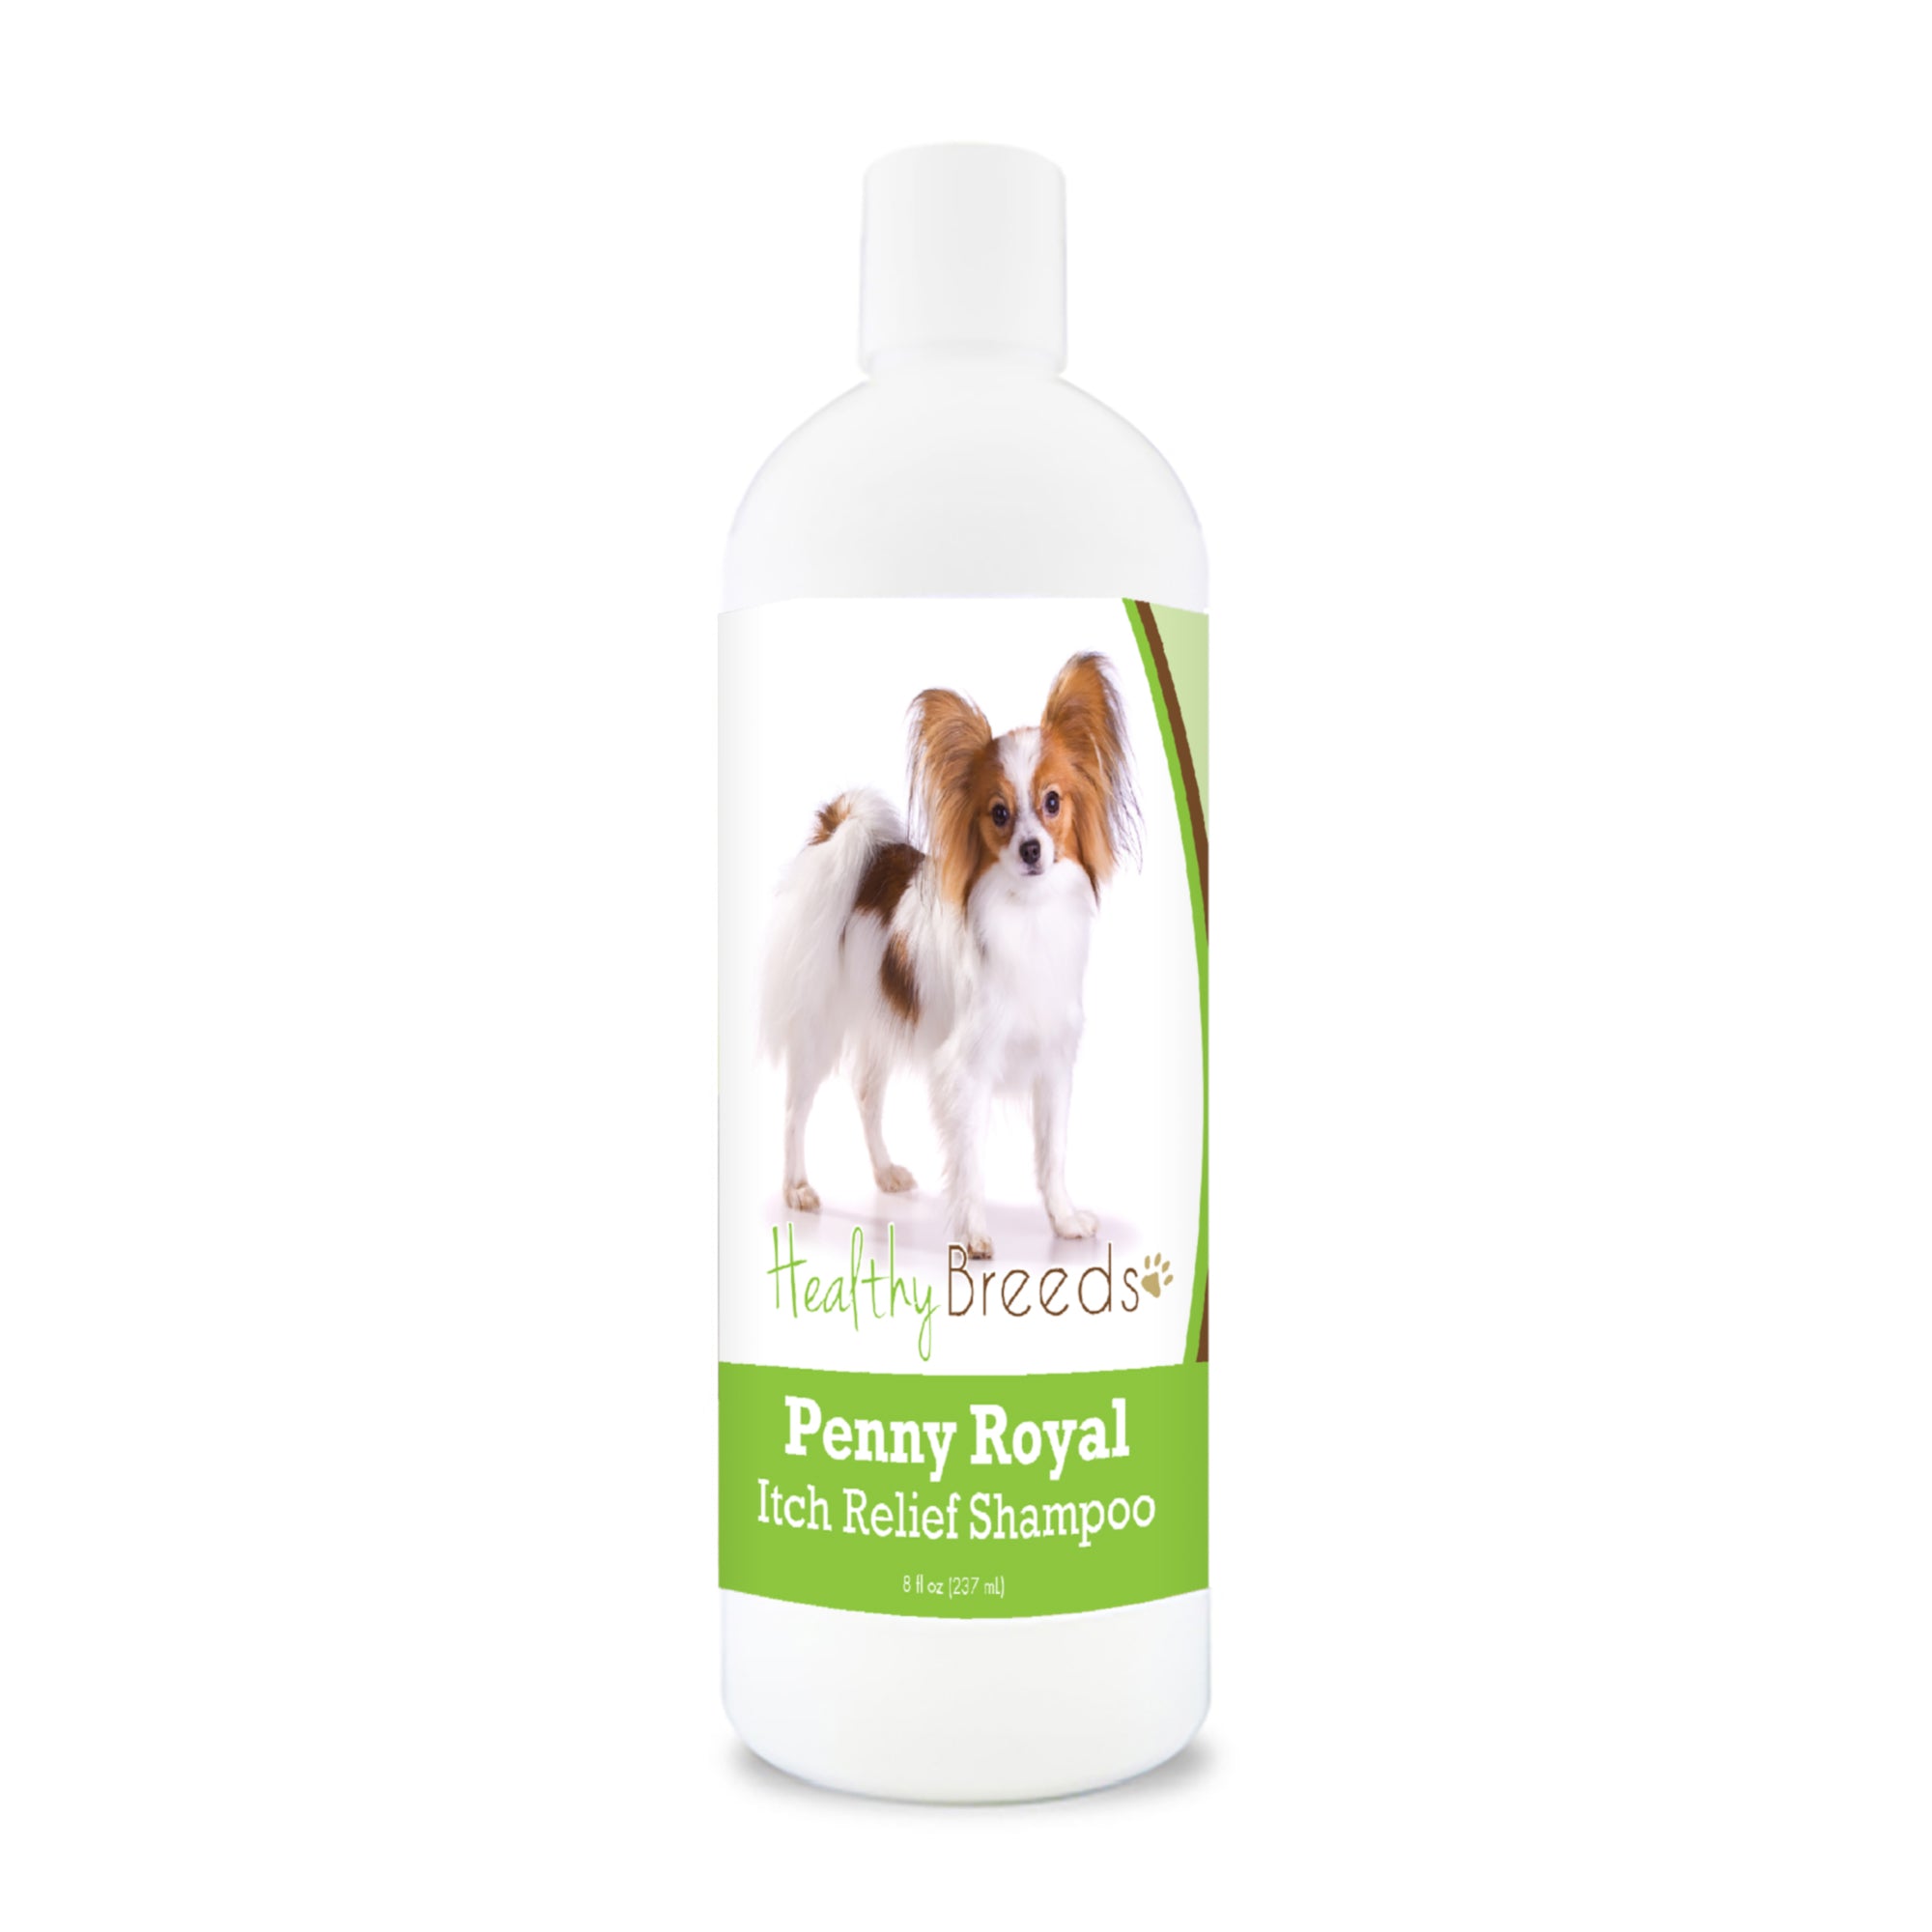 Papillon Penny Royal Itch Relief Shampoo 8 oz